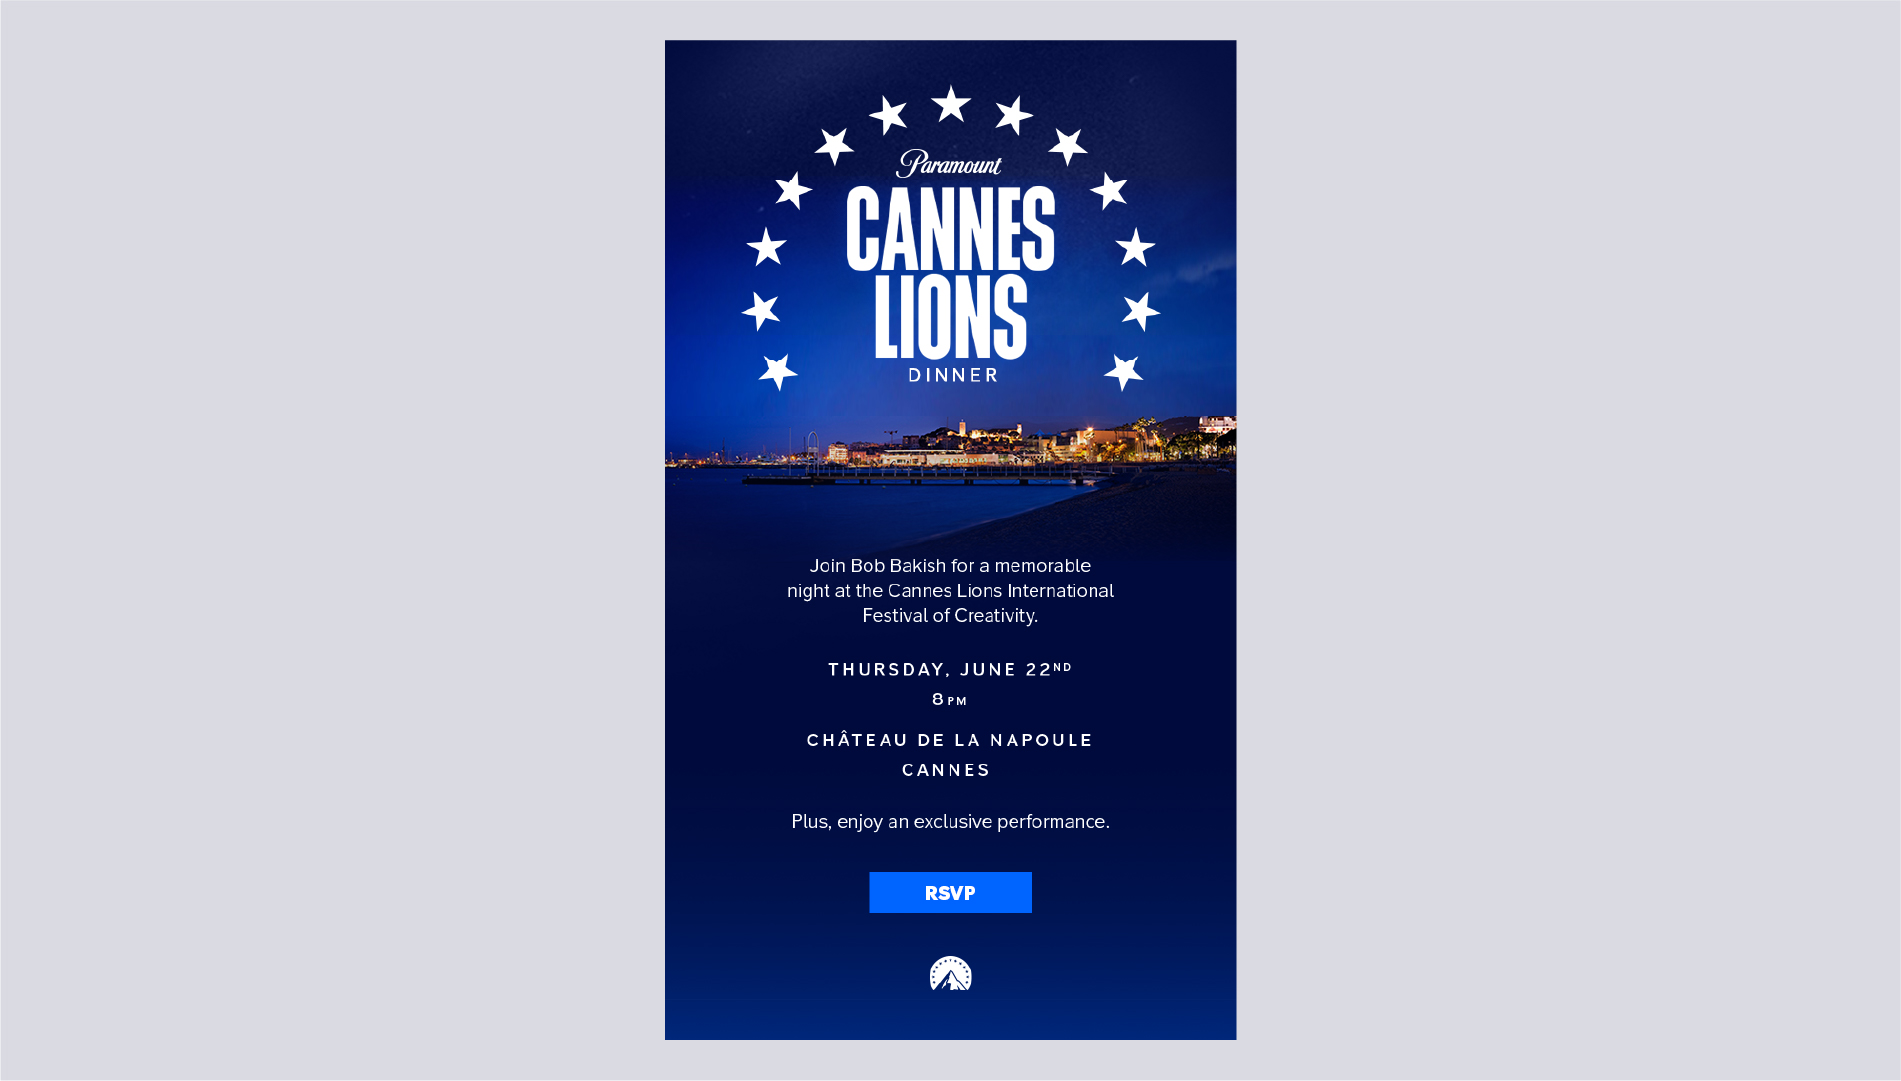 PARAMOUNT CANNES LIONS DINNER